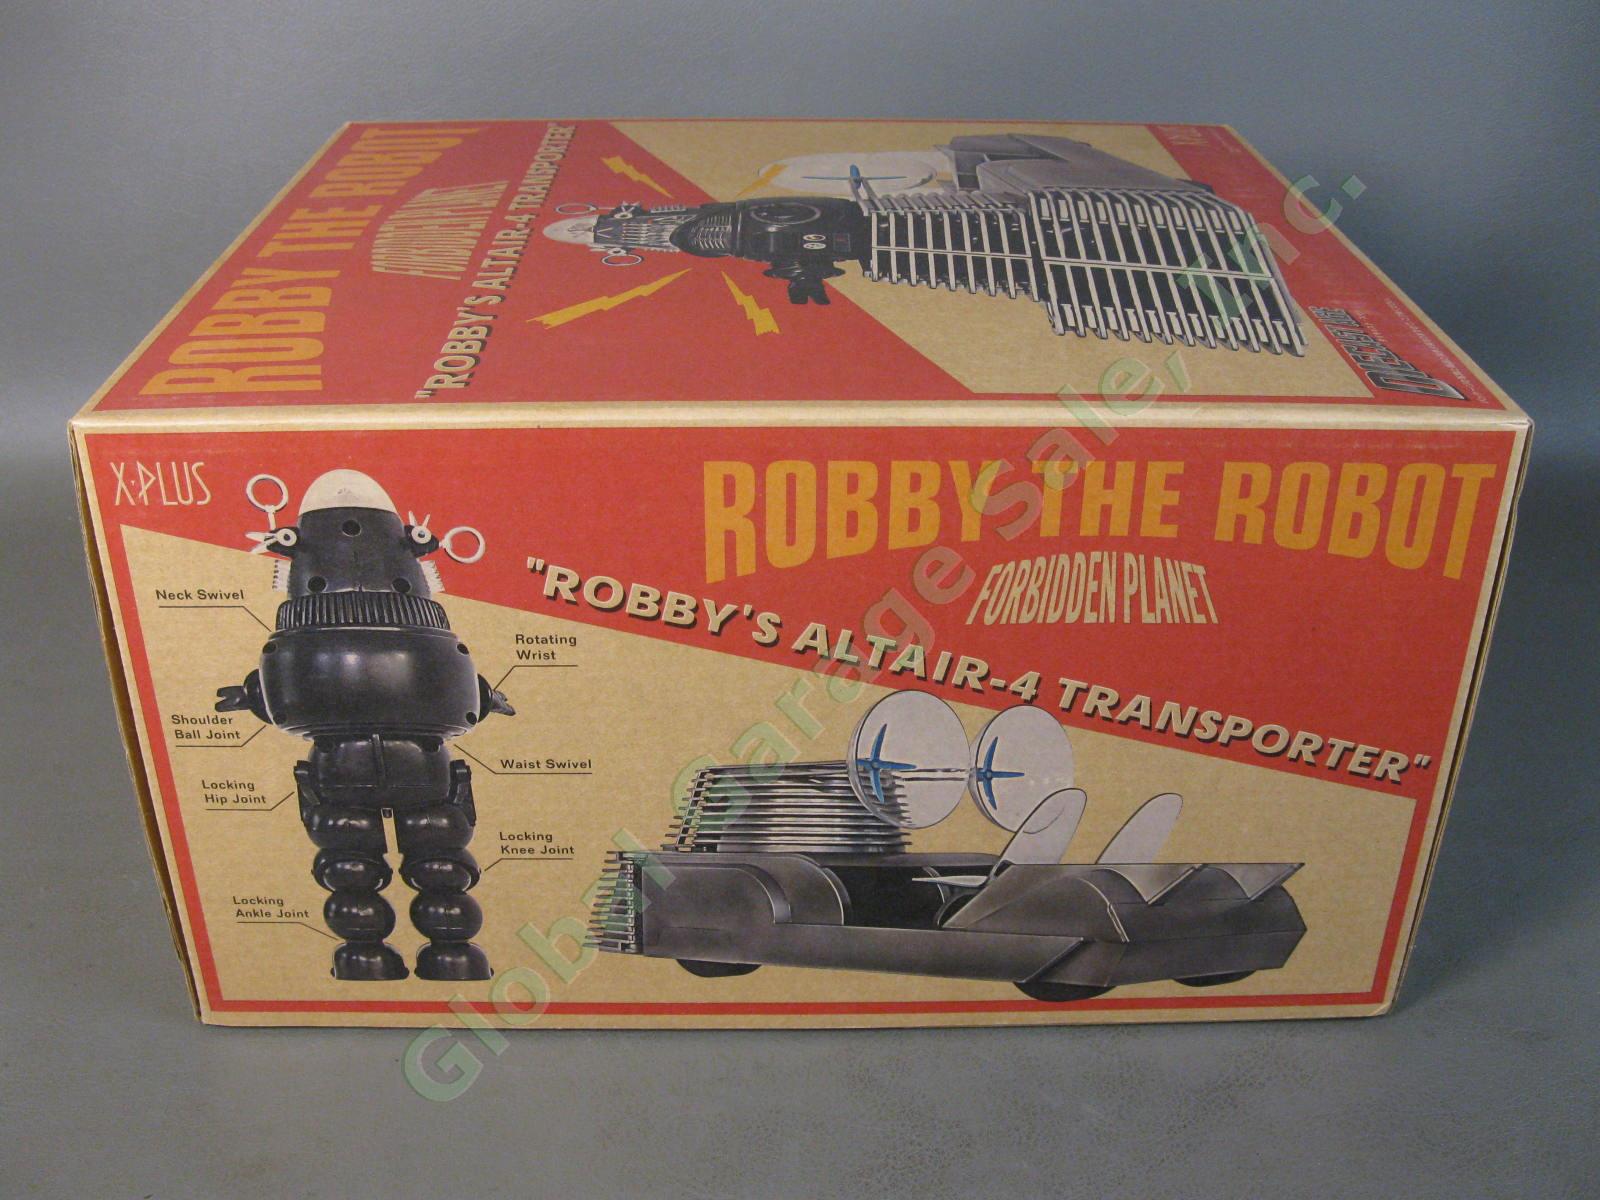 1956 Forbidden Planet Robby the Robot & Altair-4 Transporter 2006 X-Plus Sci-Fi 1